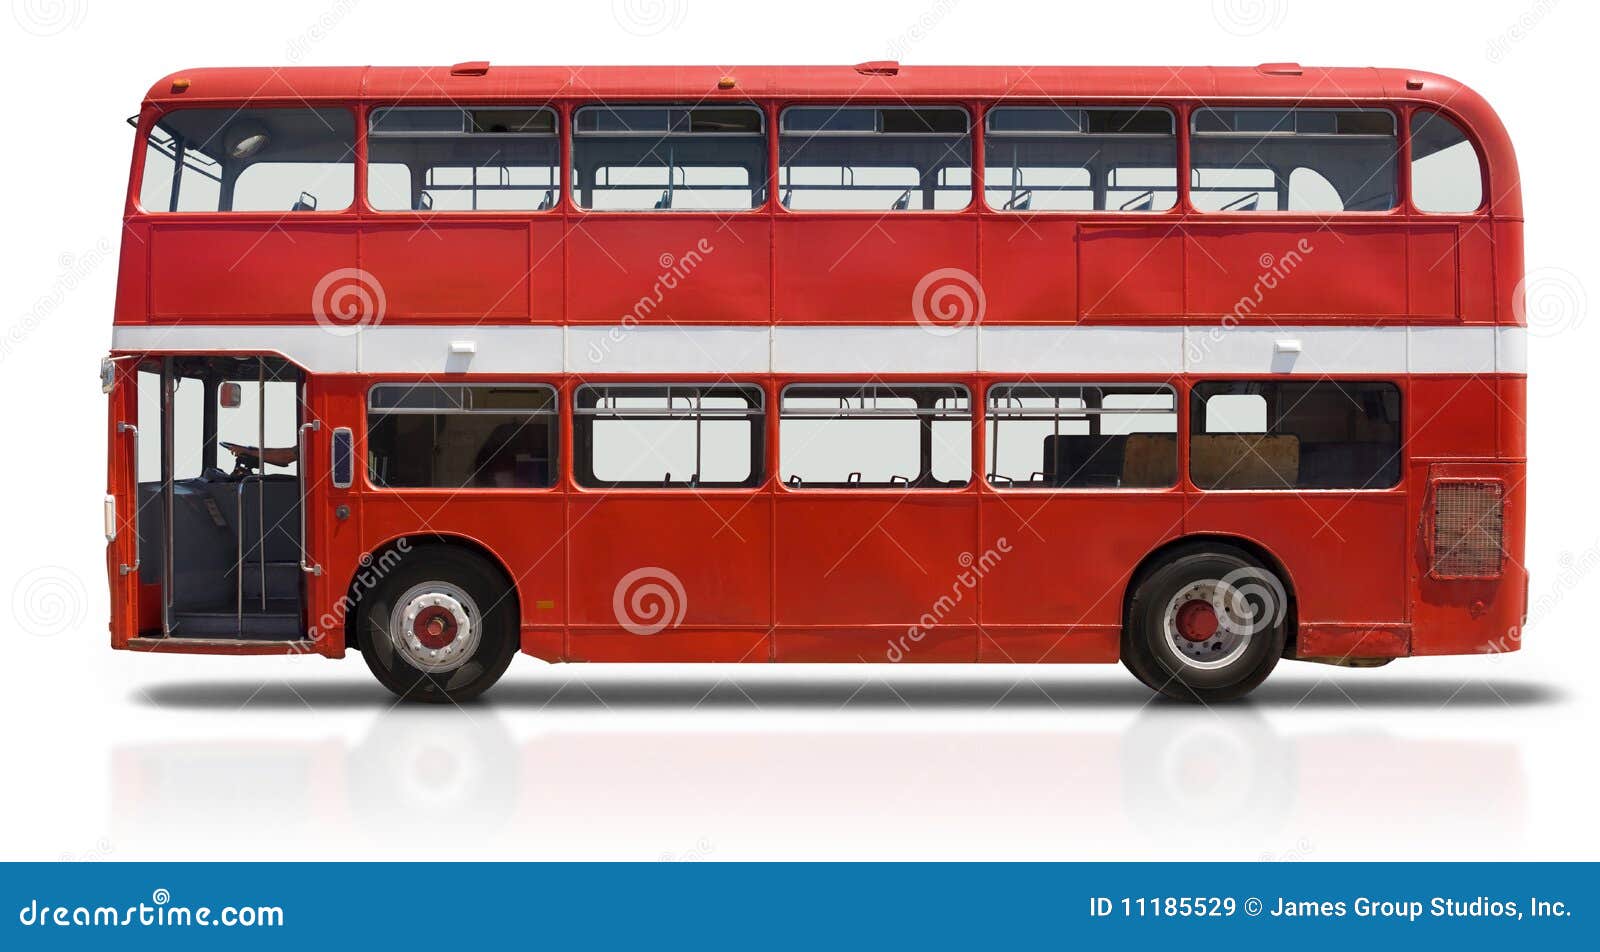 red double decker bus on white